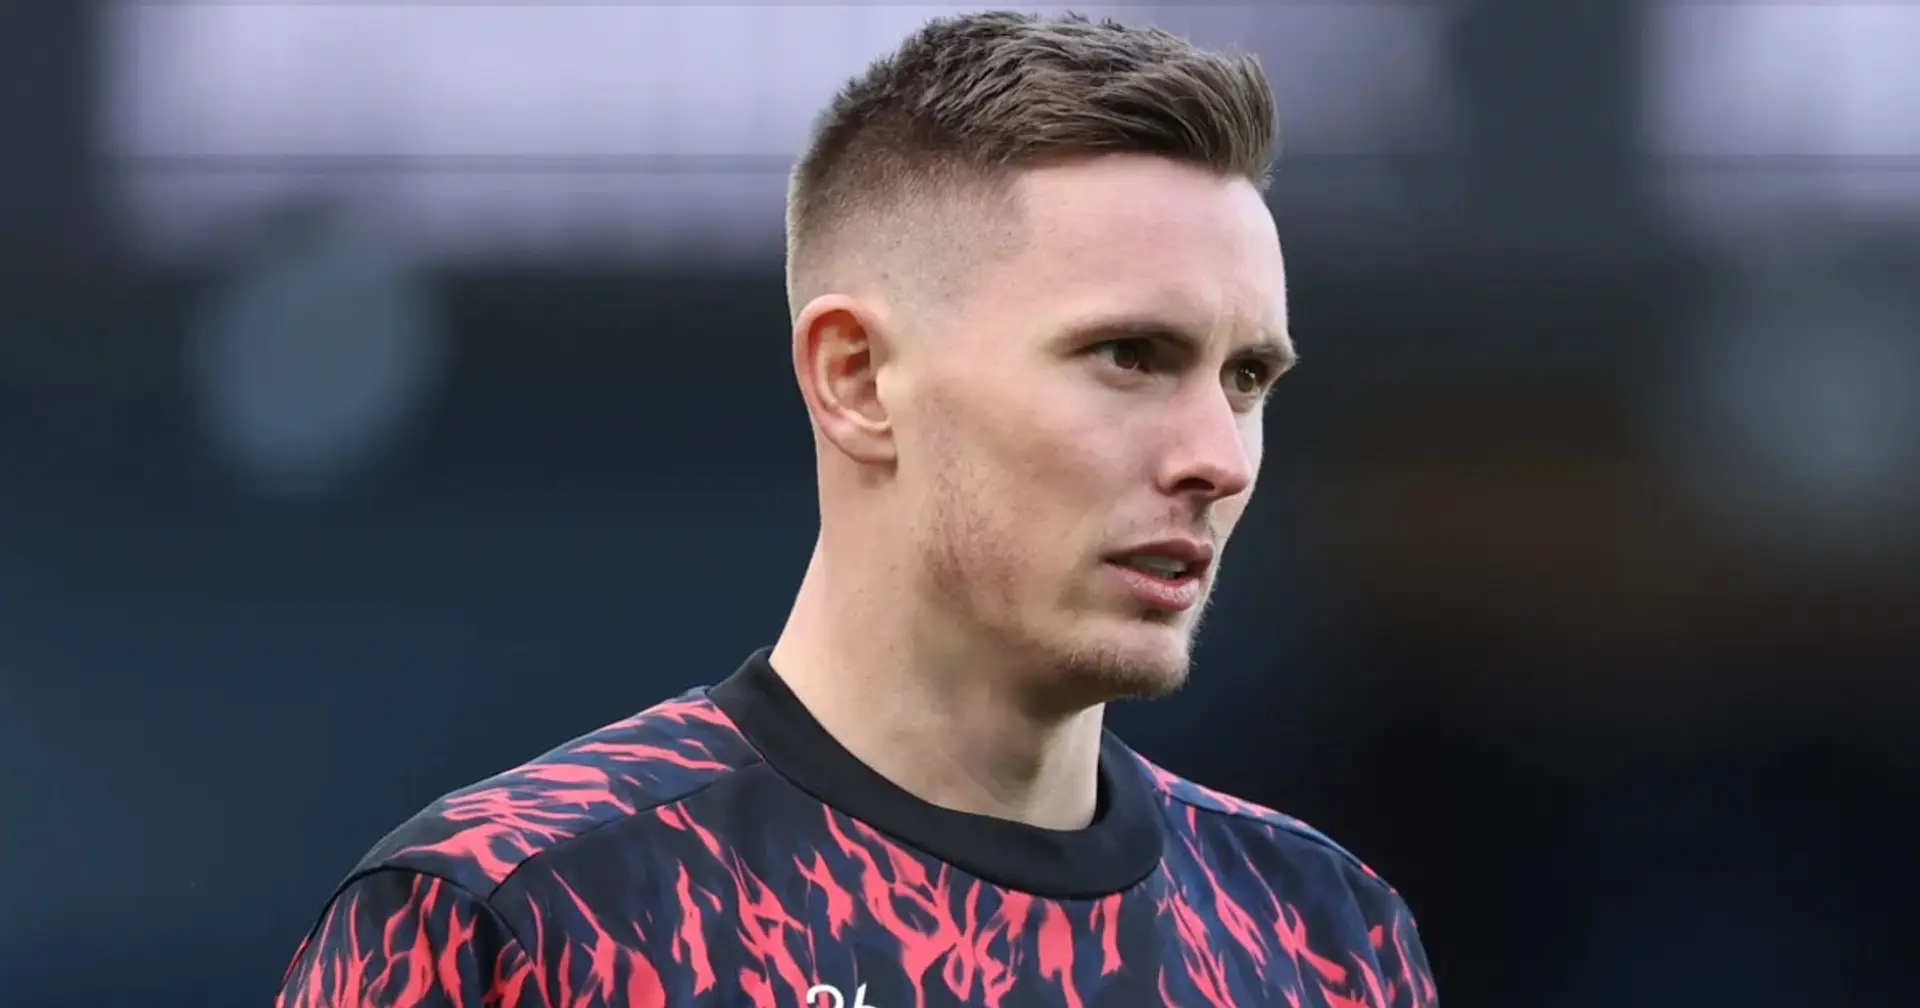 Nottingham Forest open talks with United for Dean Henderson signing - terms revealed (reliability: 5 stars)